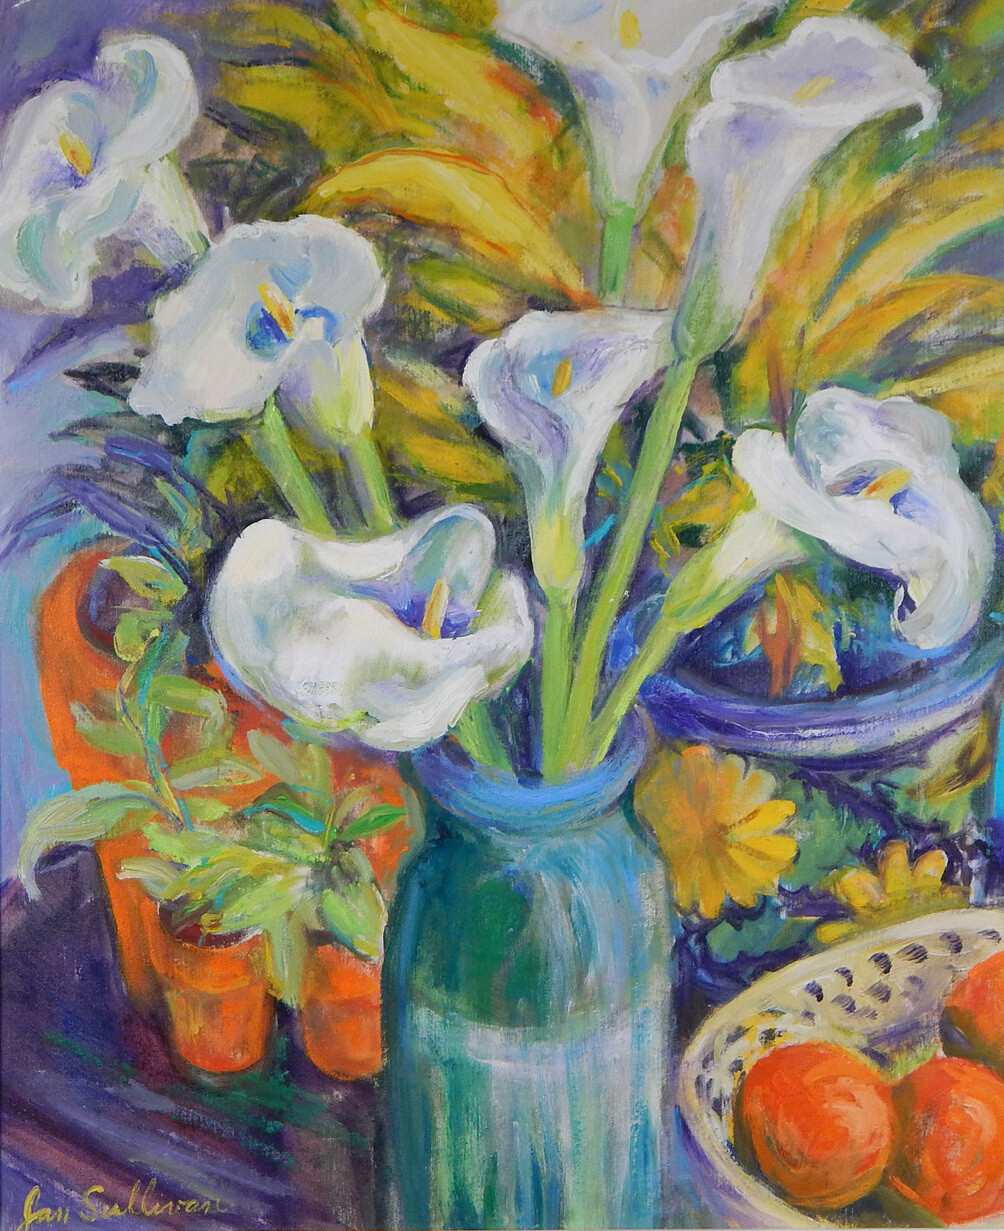 "Calla Lilies" Oil Painting, by Jan Sullivan